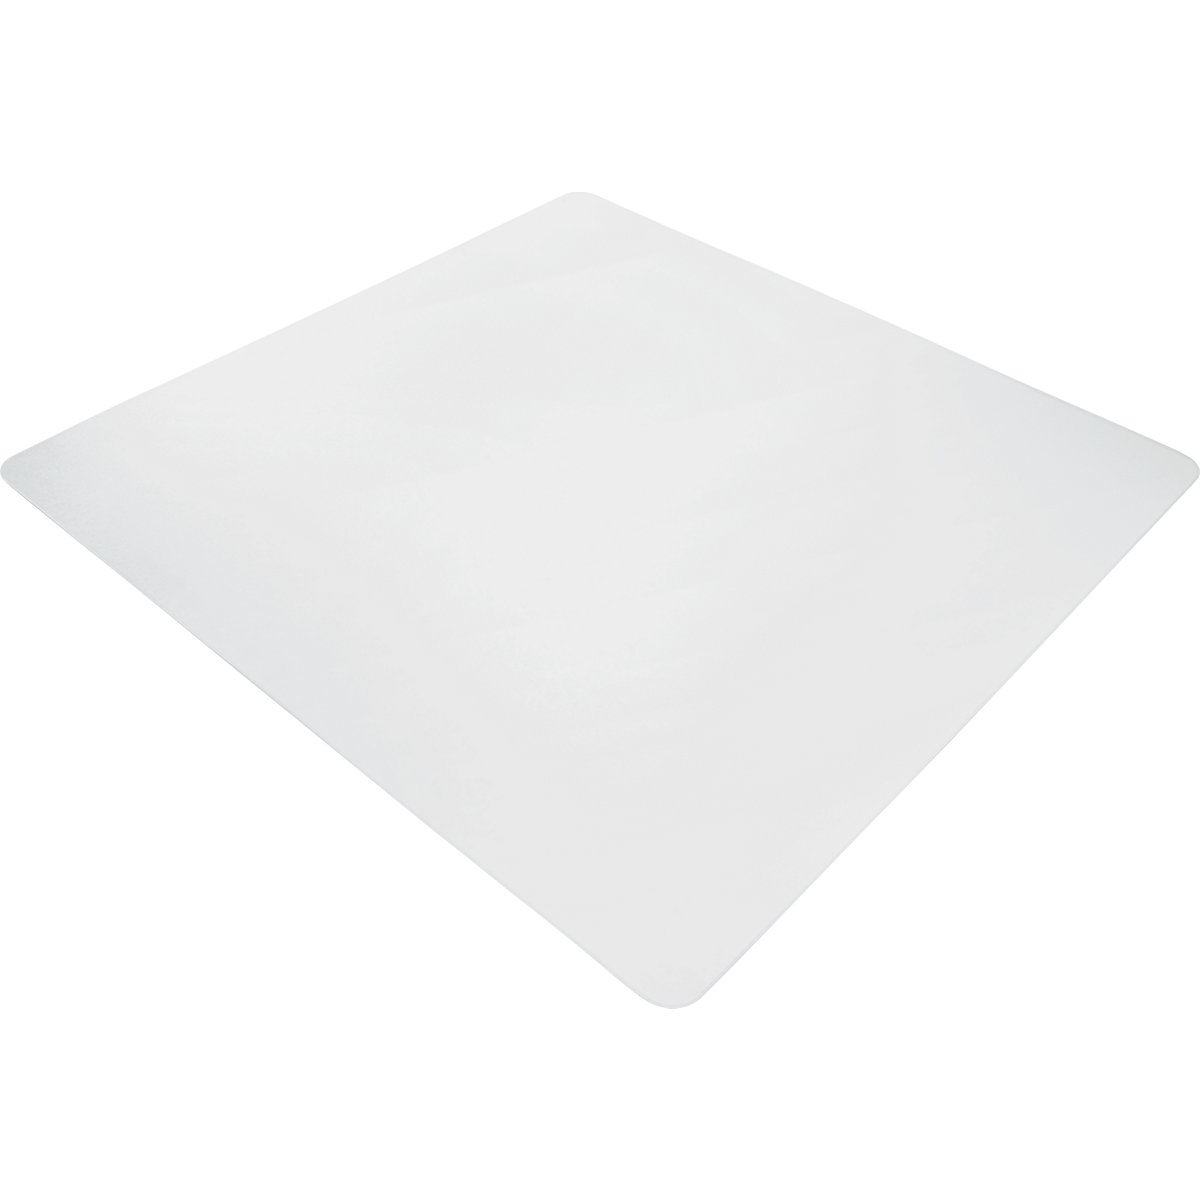 Floor protection mat ECOGRIP SOLID, for smooth and hard floors, WxD 1200 x 1100 mm-8